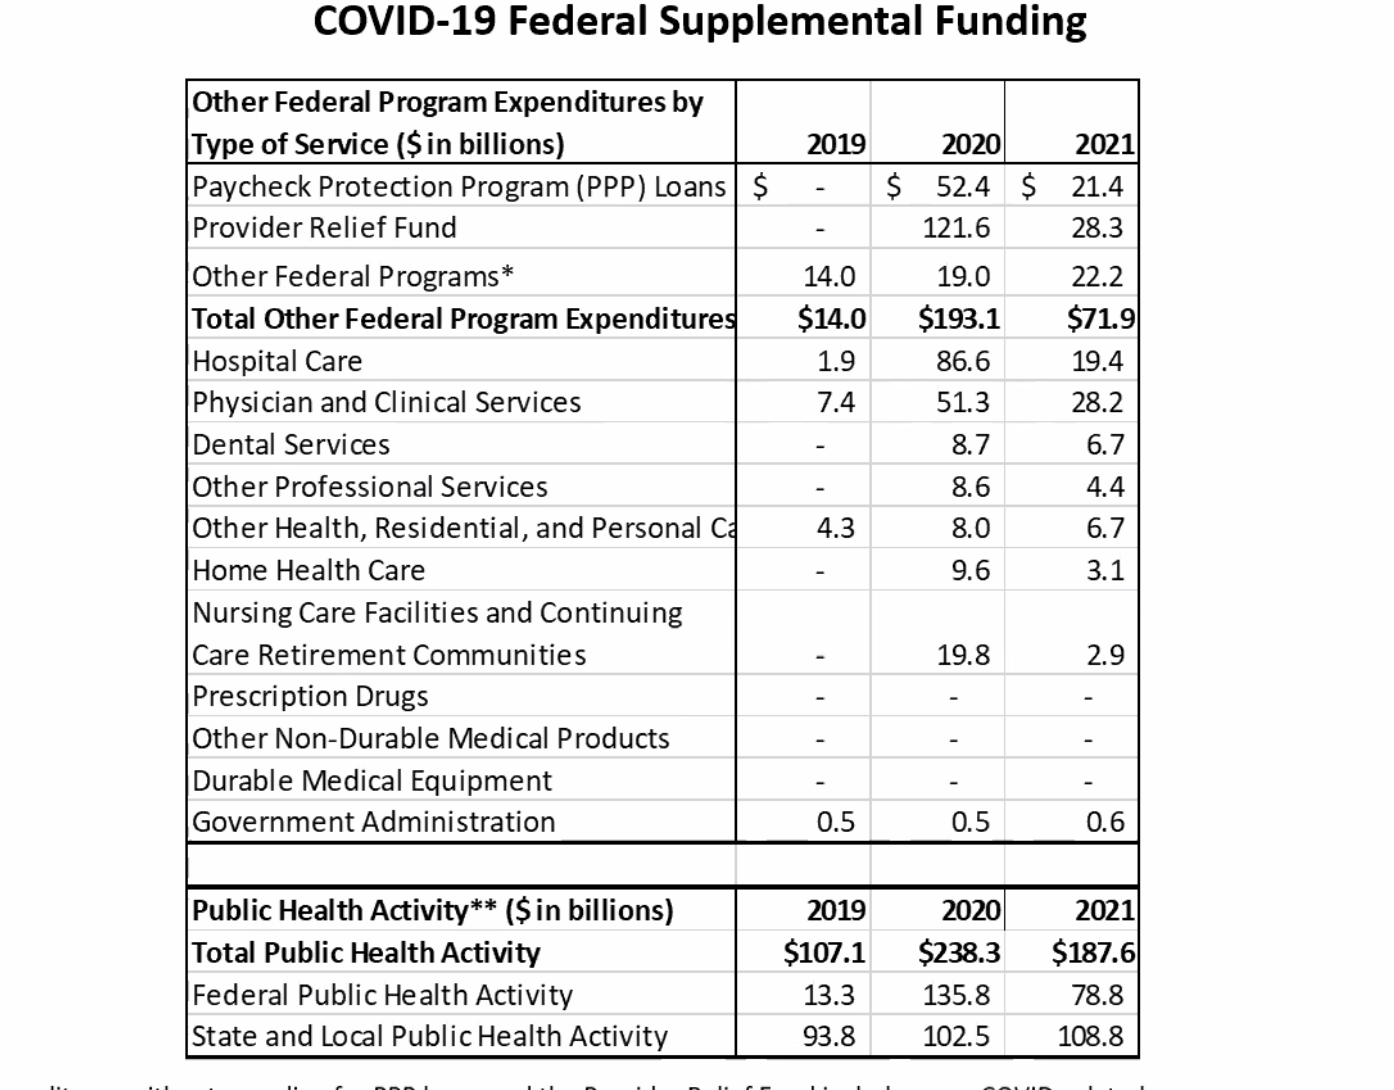 CMS calculations of federal government healthcare spending that shows steep decline in spending related to the pandemic.

Source: CMS press briefing, Dec.14, 2022